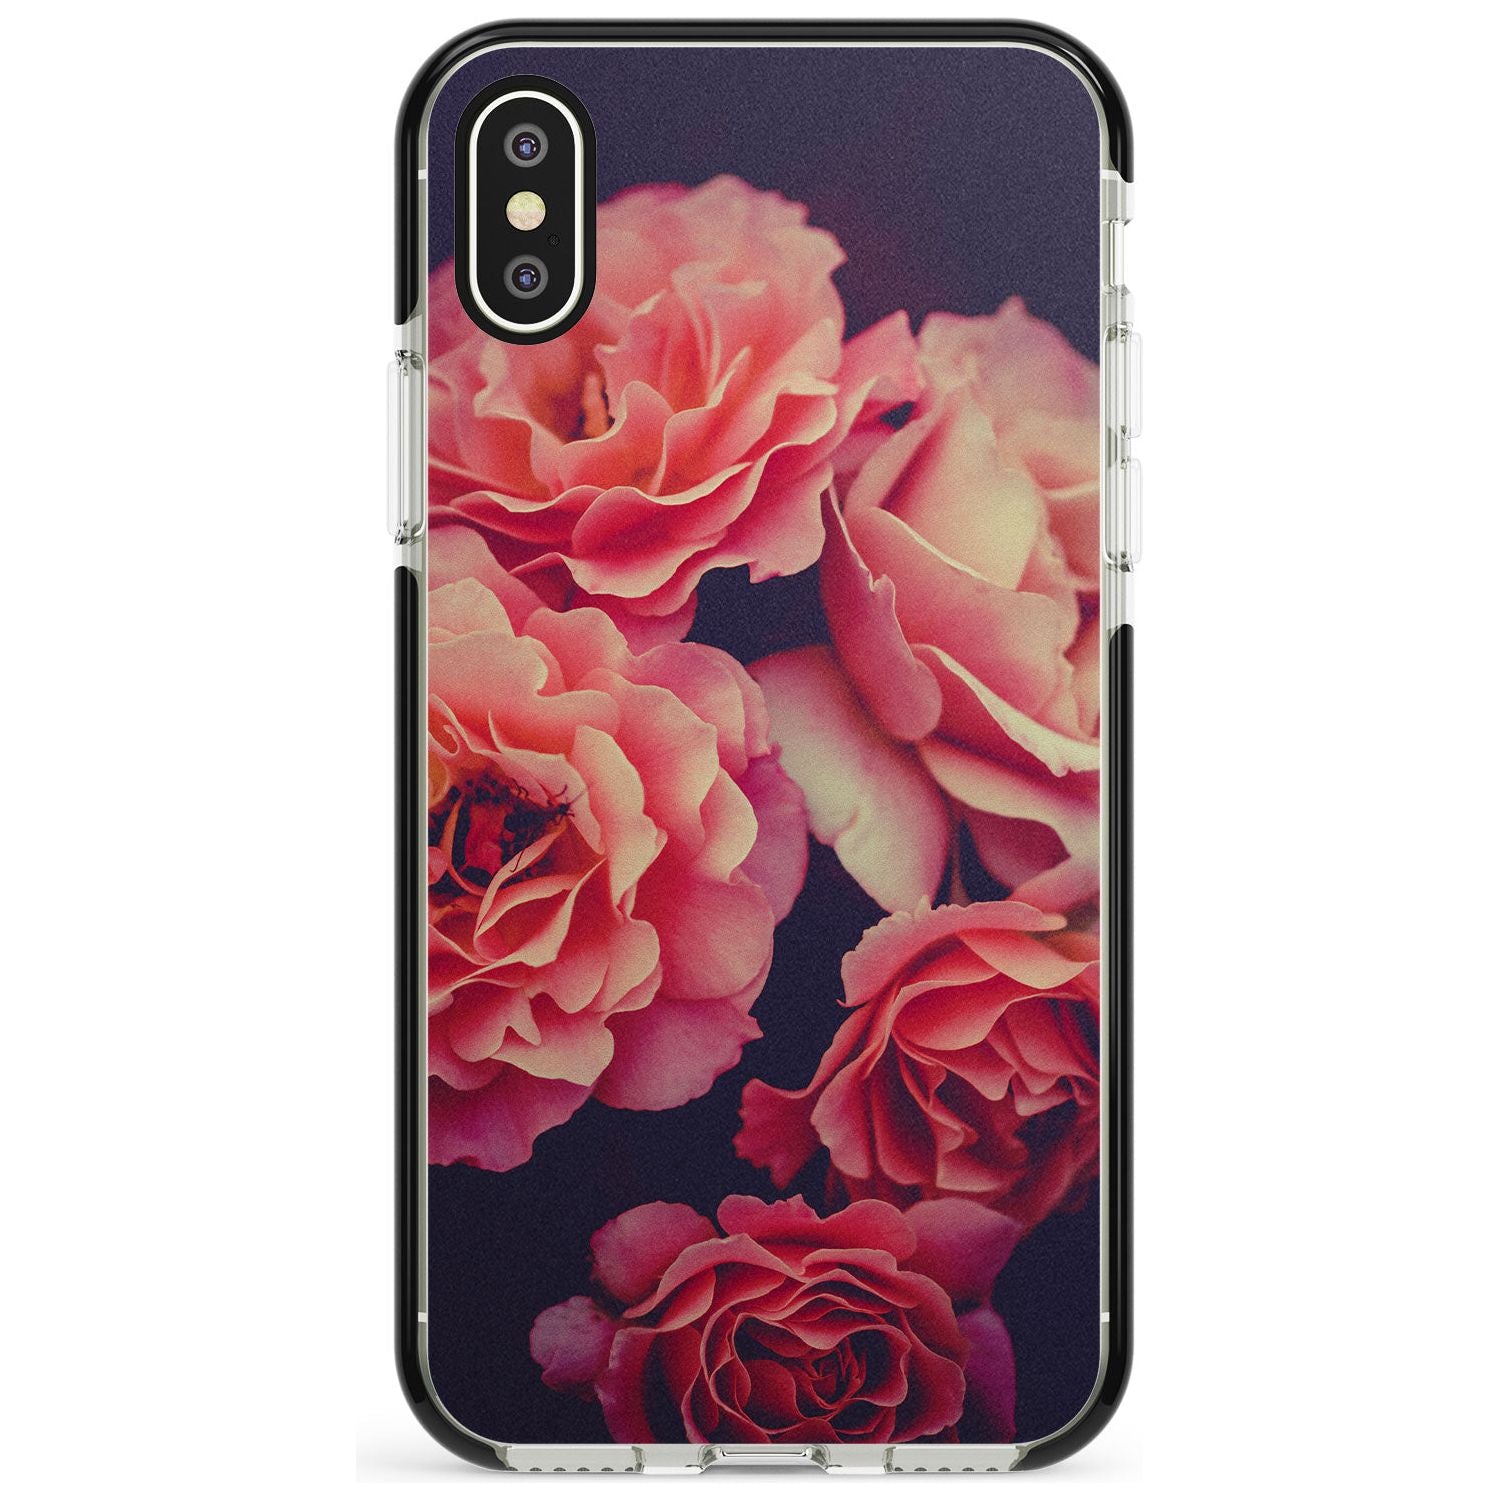 Pink Roses Photograph Black Impact Phone Case for iPhone X XS Max XR